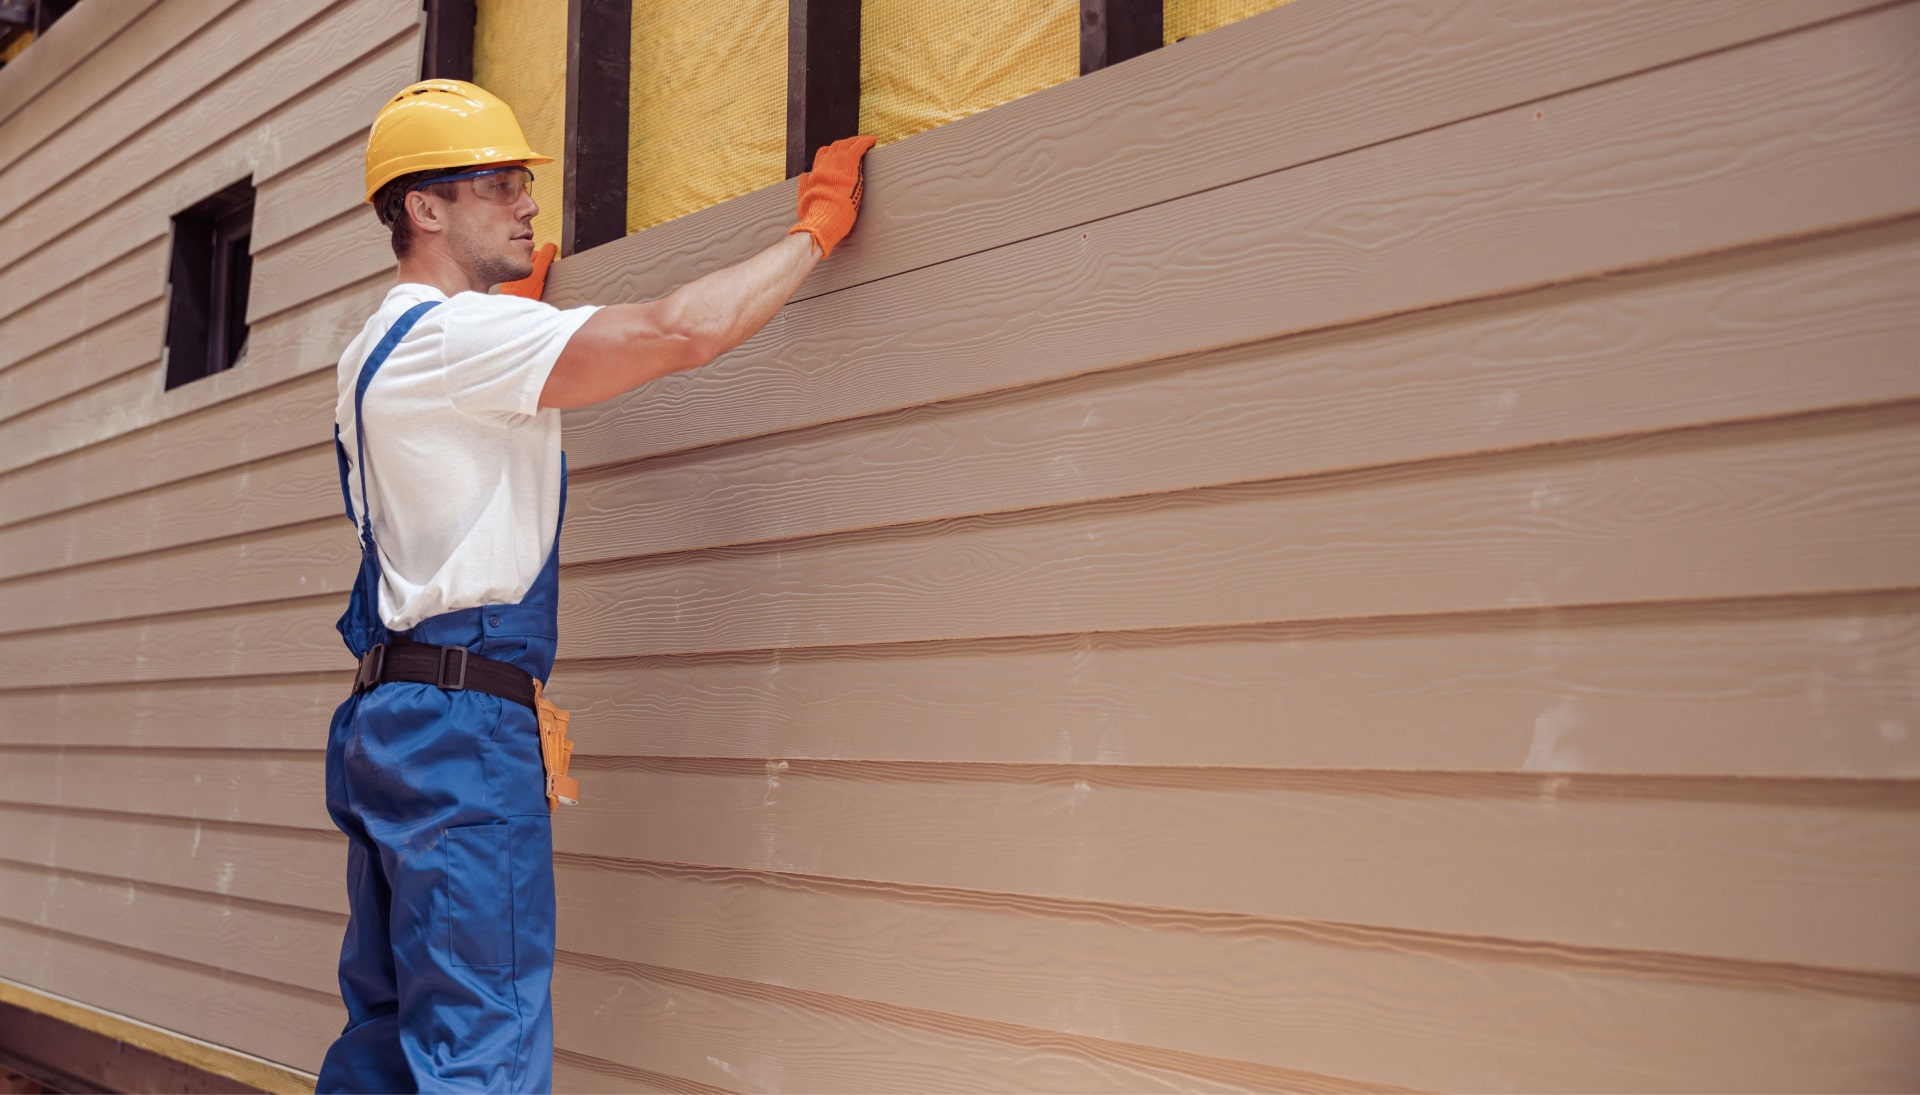 A professional siding contractor wearing a tool belt installs siding on a home in Birmingham, AL.